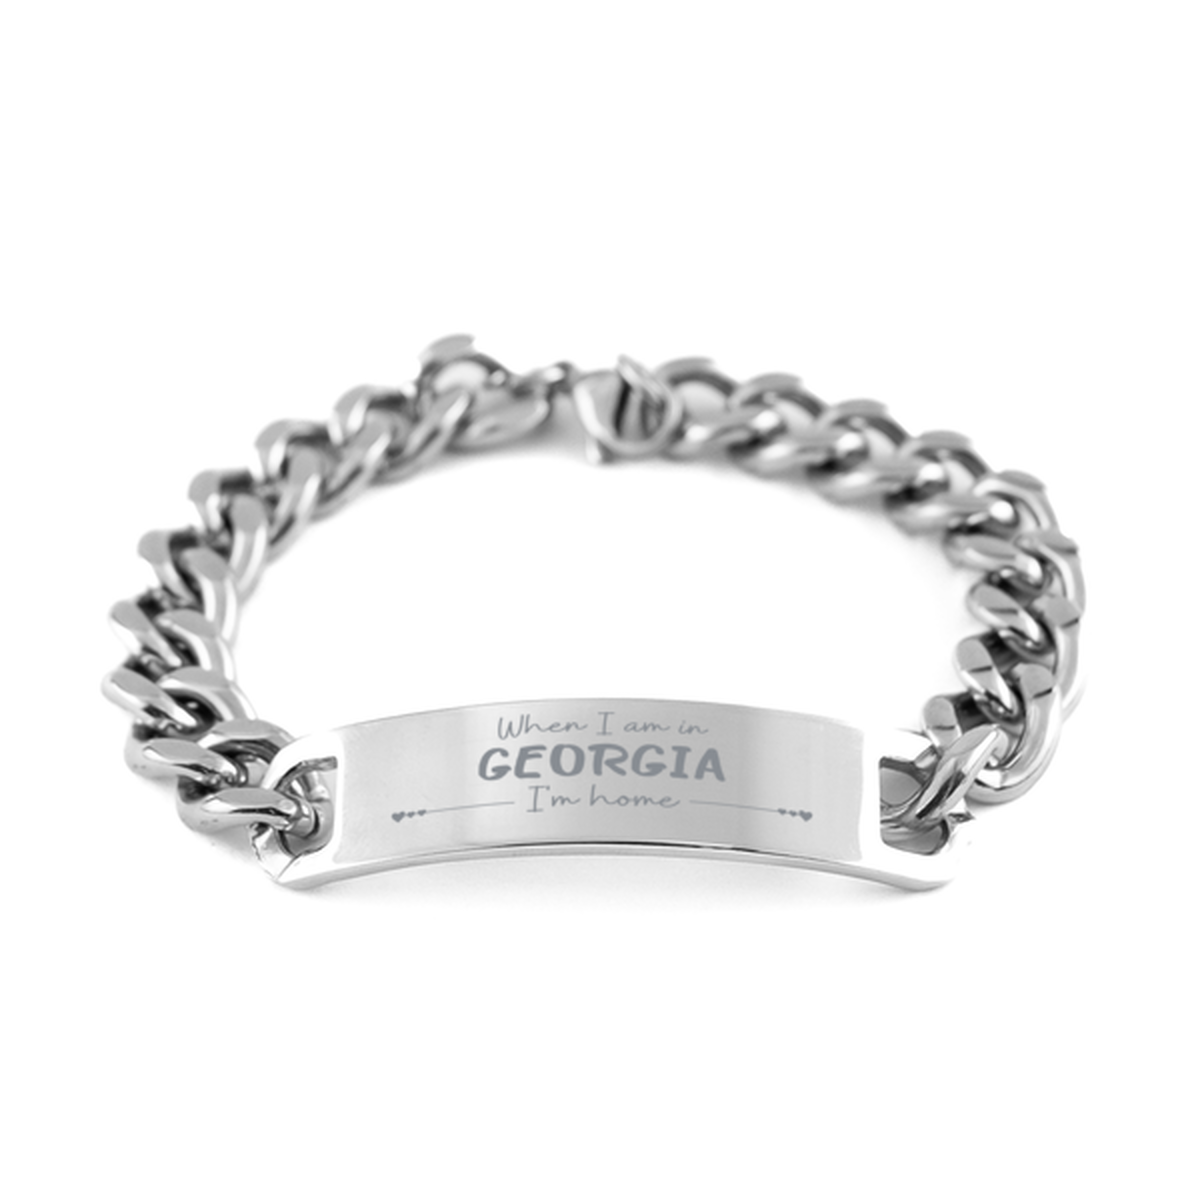 When I am in Georgia I'm home Cuban Chain Stainless Steel Bracelet, Cheap Gifts For Georgia, State Georgia Birthday Gifts for Friends Coworker